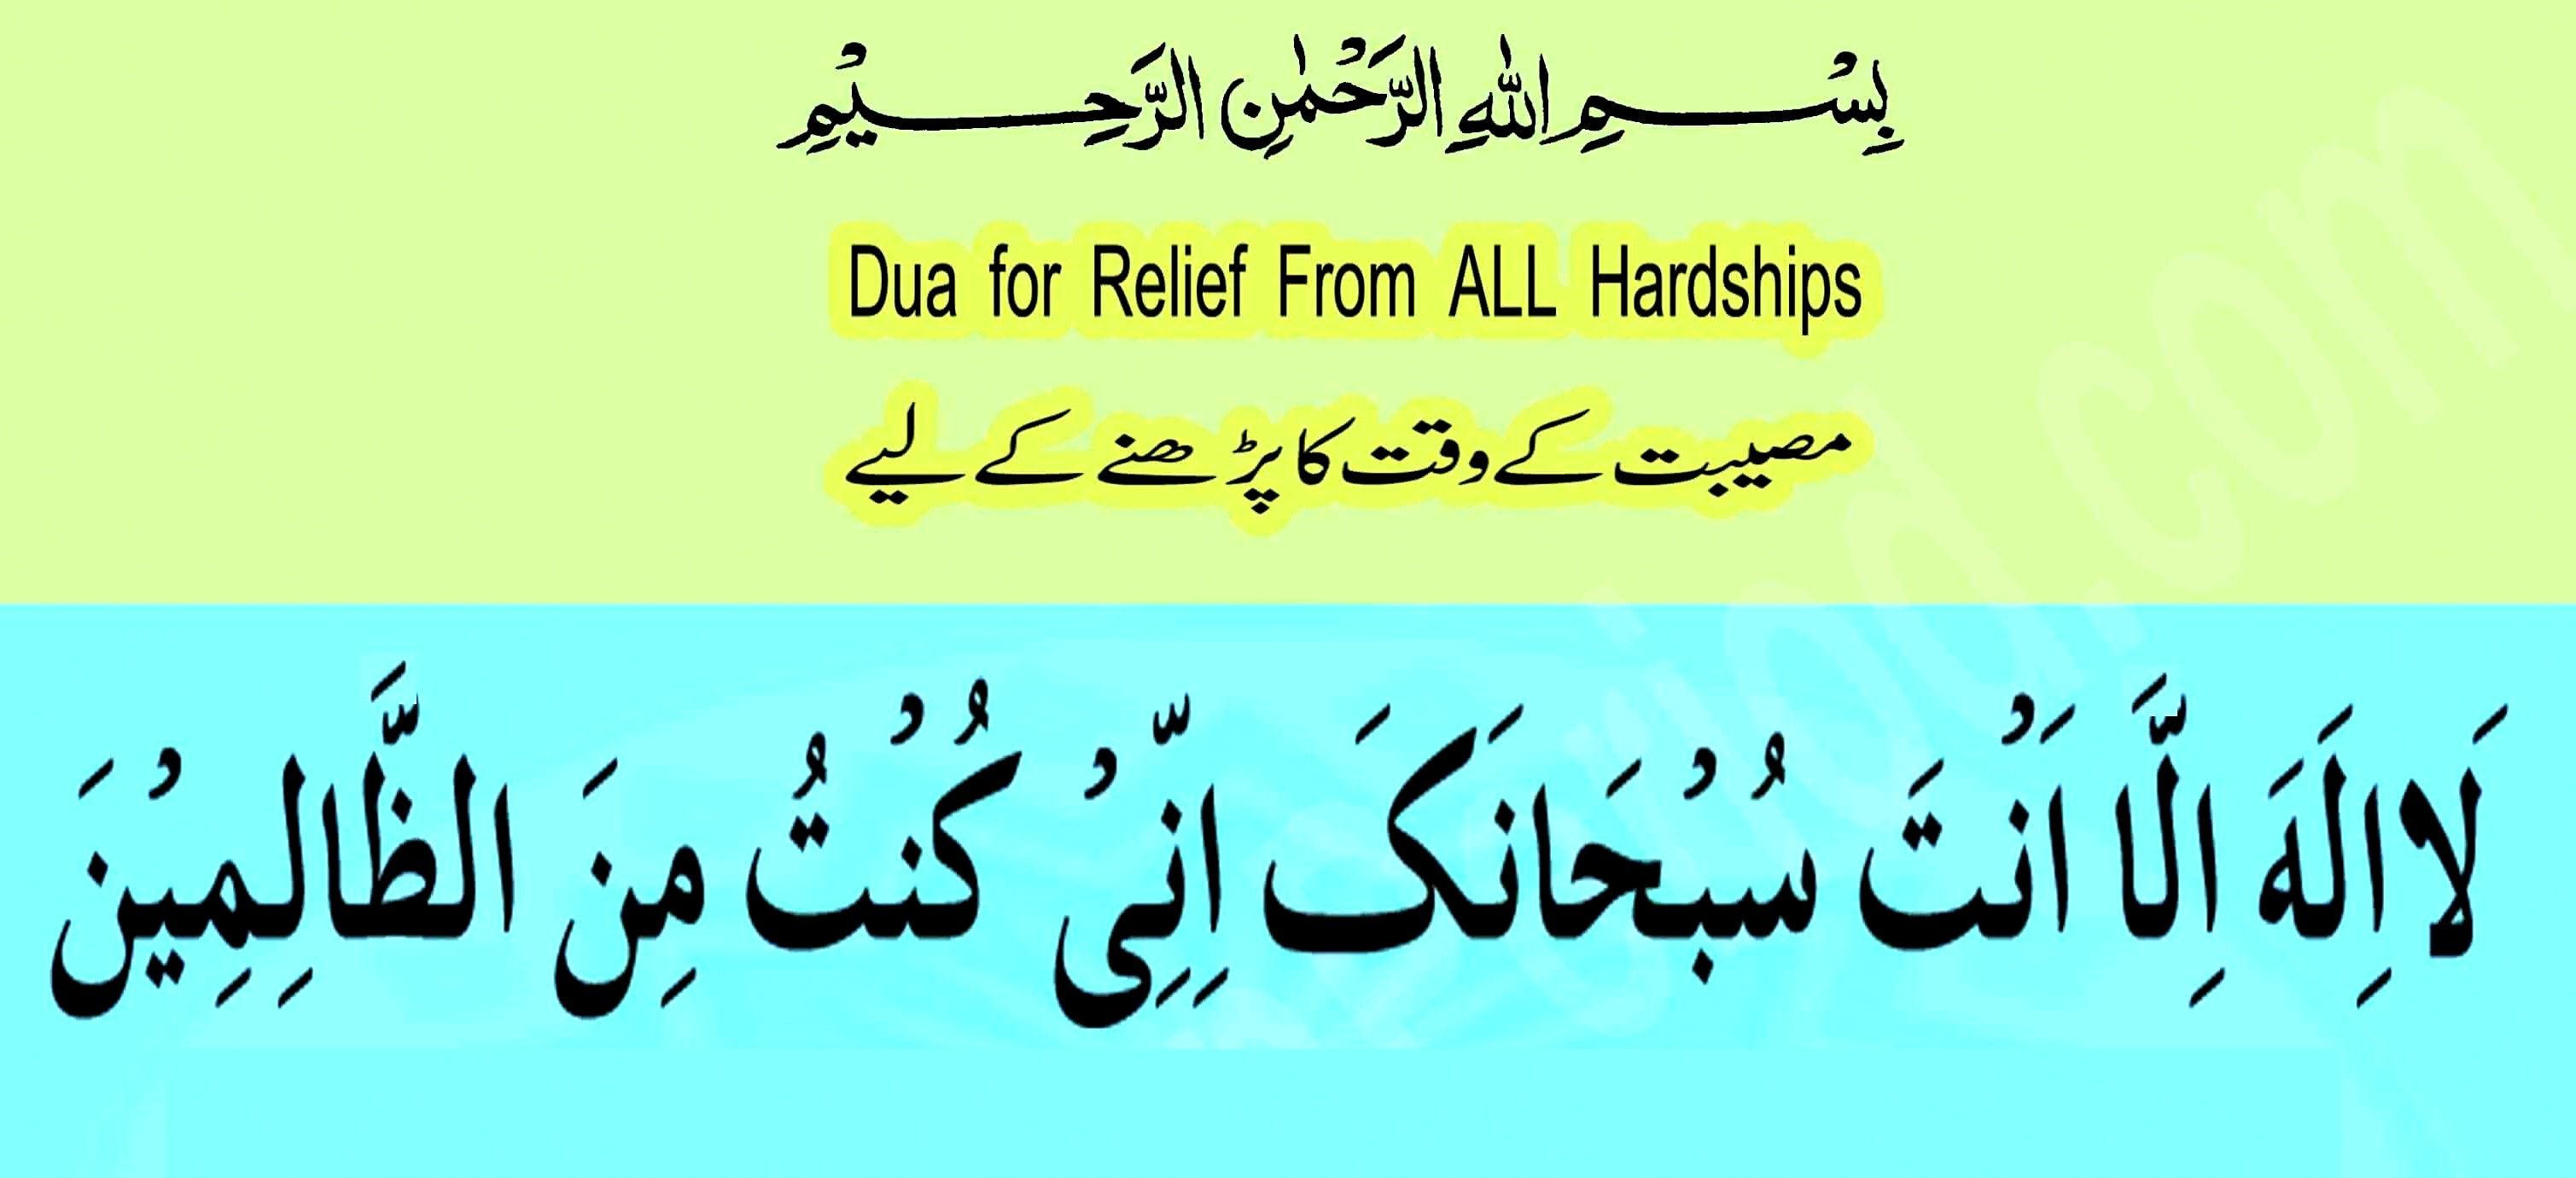 Dua For Relief From All Hardships